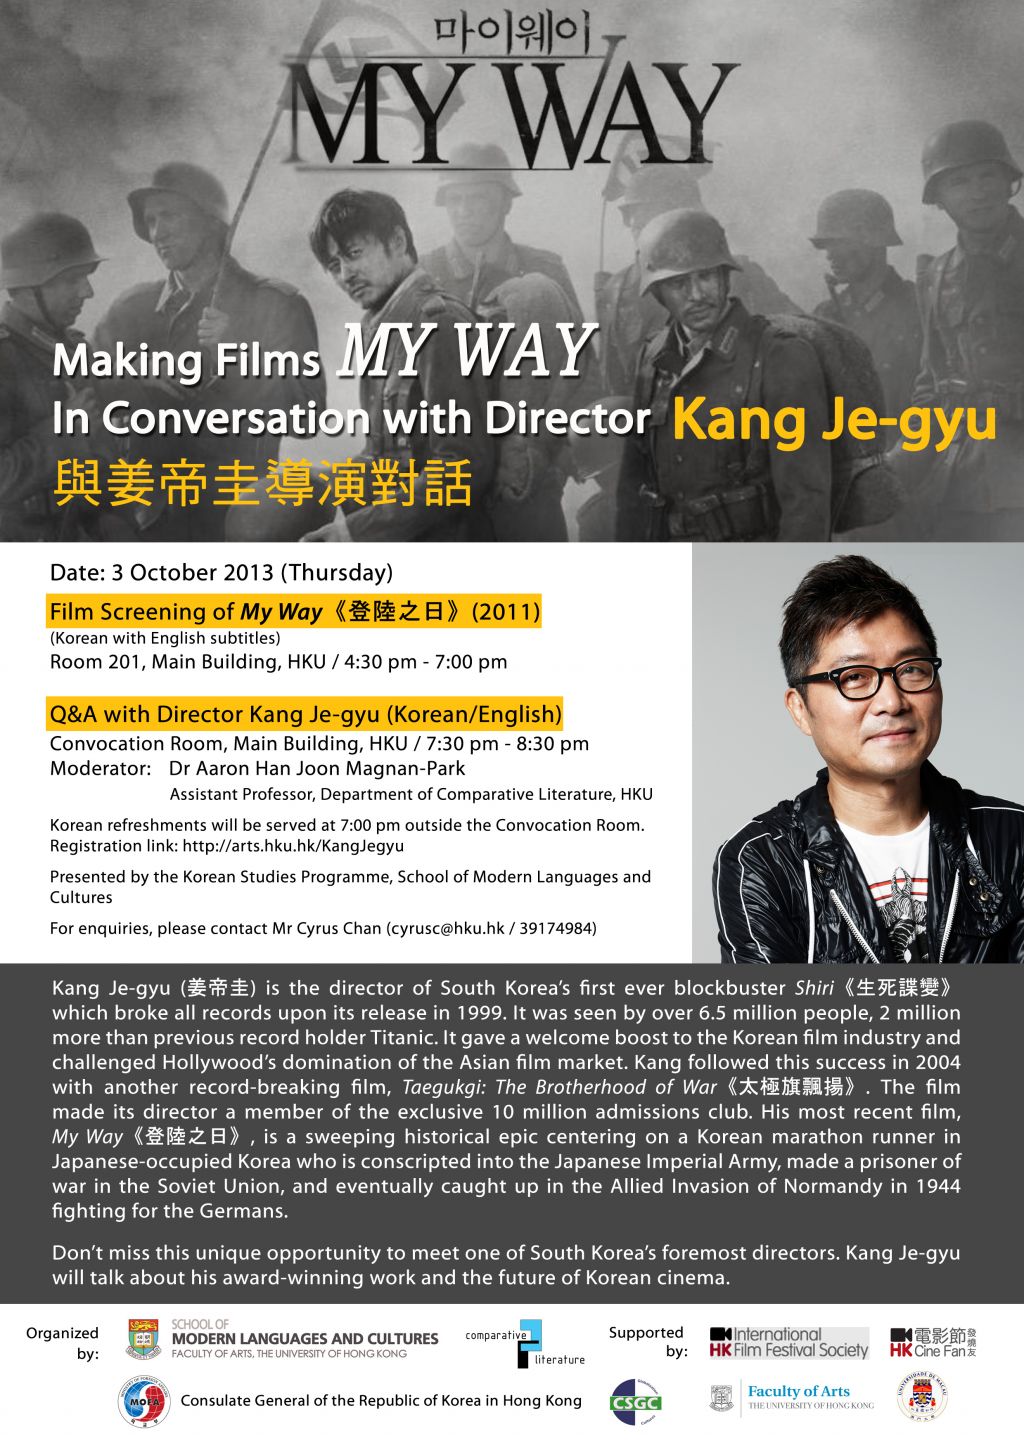 Making Films My Way: In Conversation with Director Kang Je-gyu (姜帝圭)